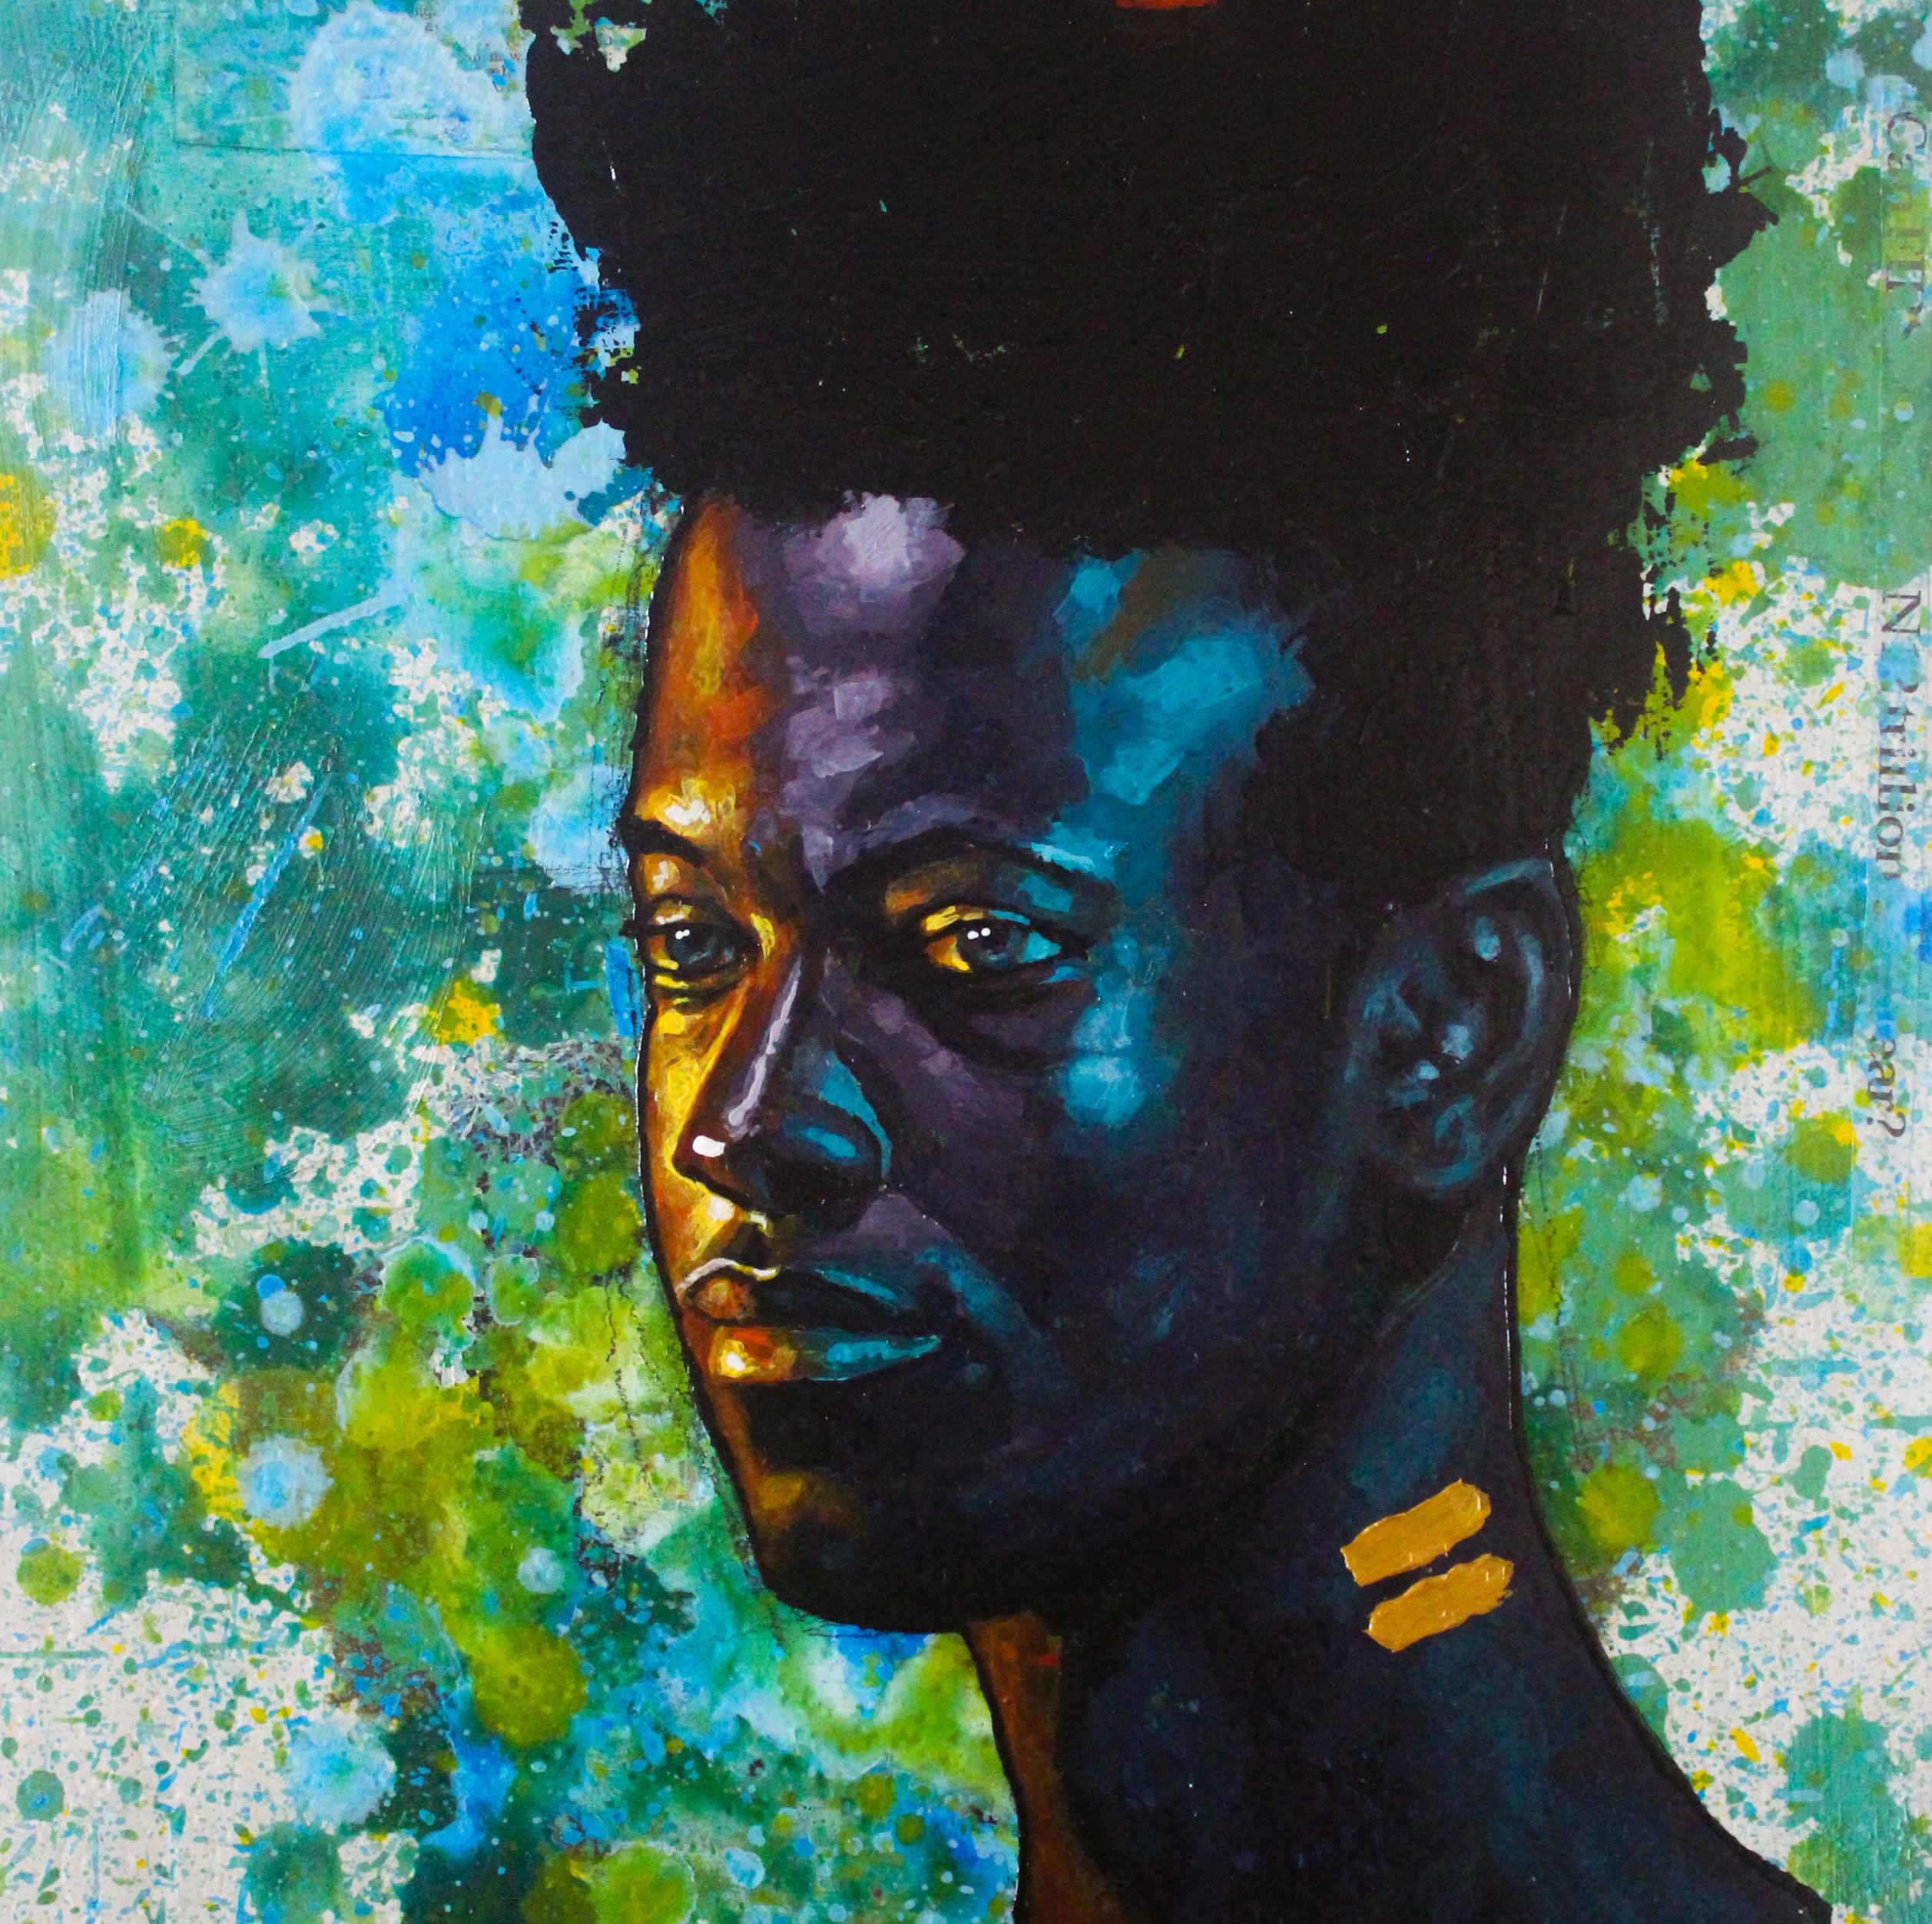 Golden Equality 2 - Neo-Expressionist Painting by Aluu Prosper Chigozie 